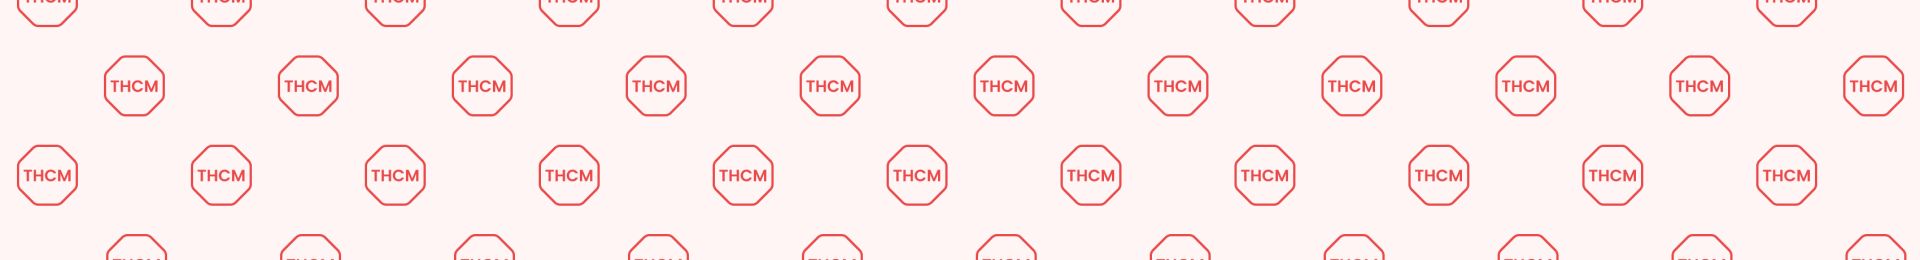 THCM Products